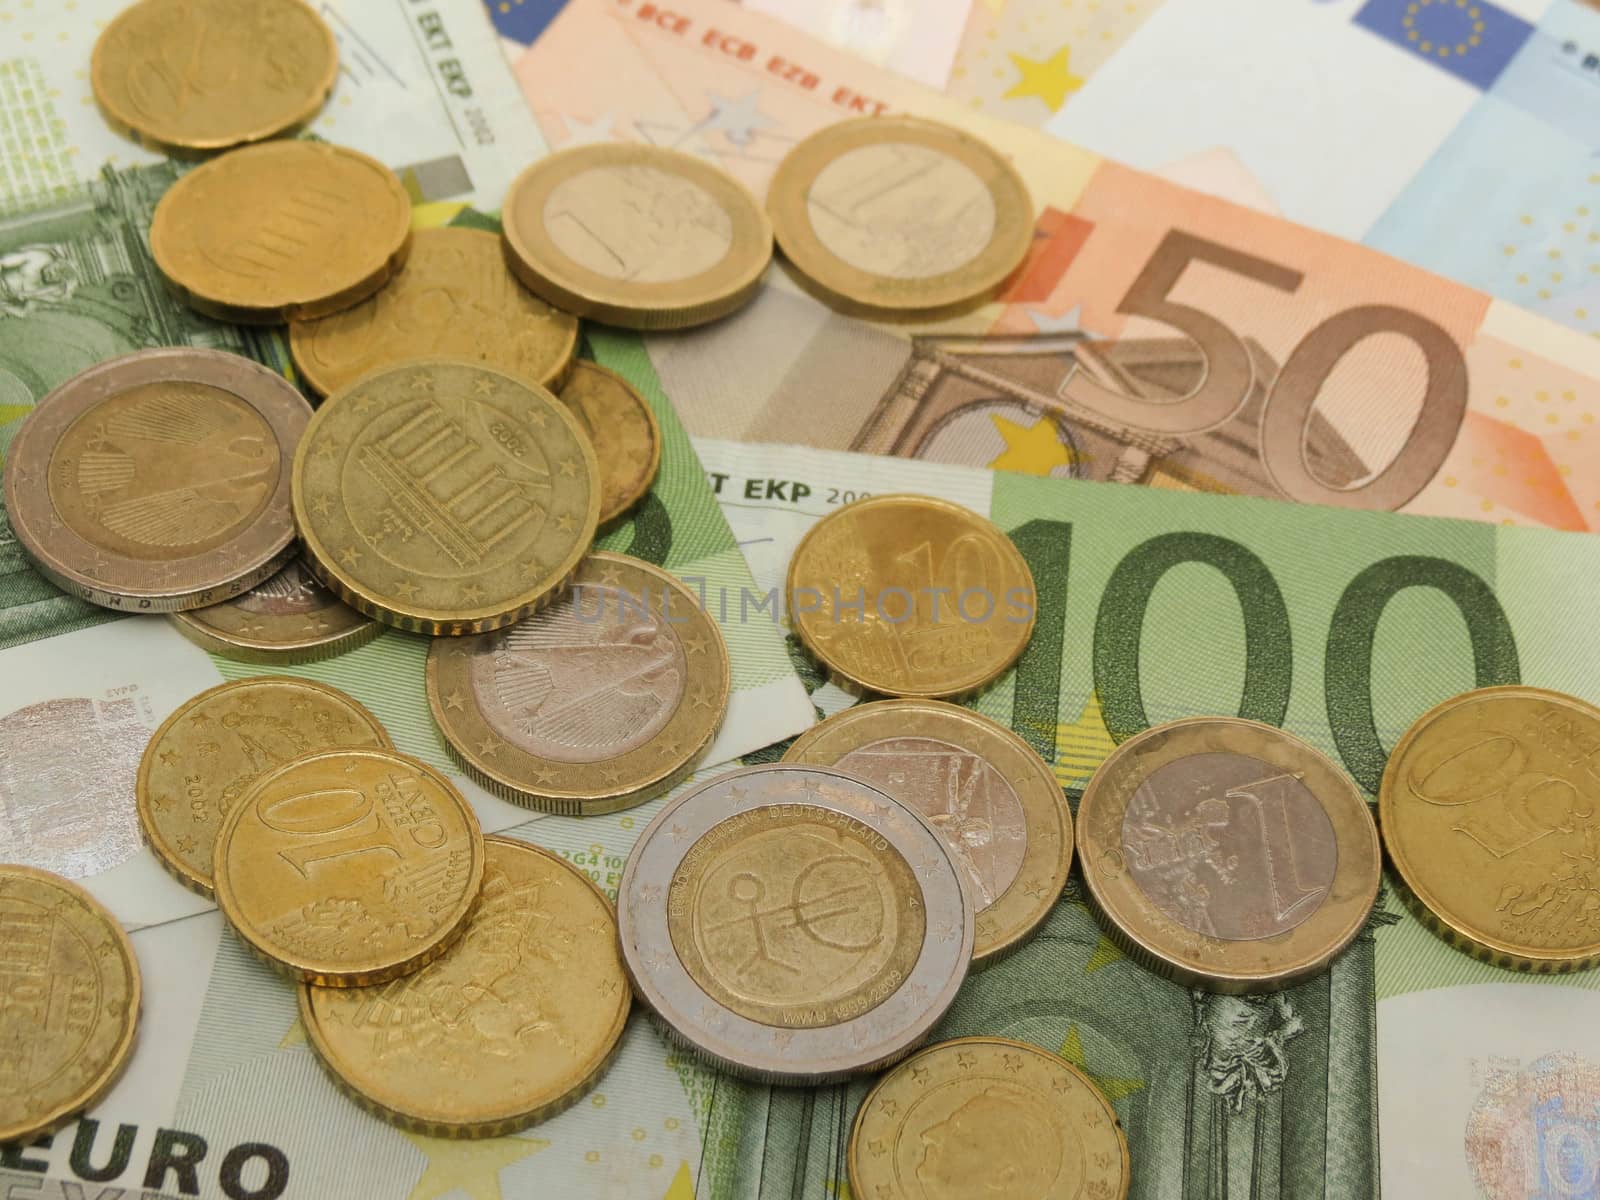 Euro banknotes and coins by paolo77